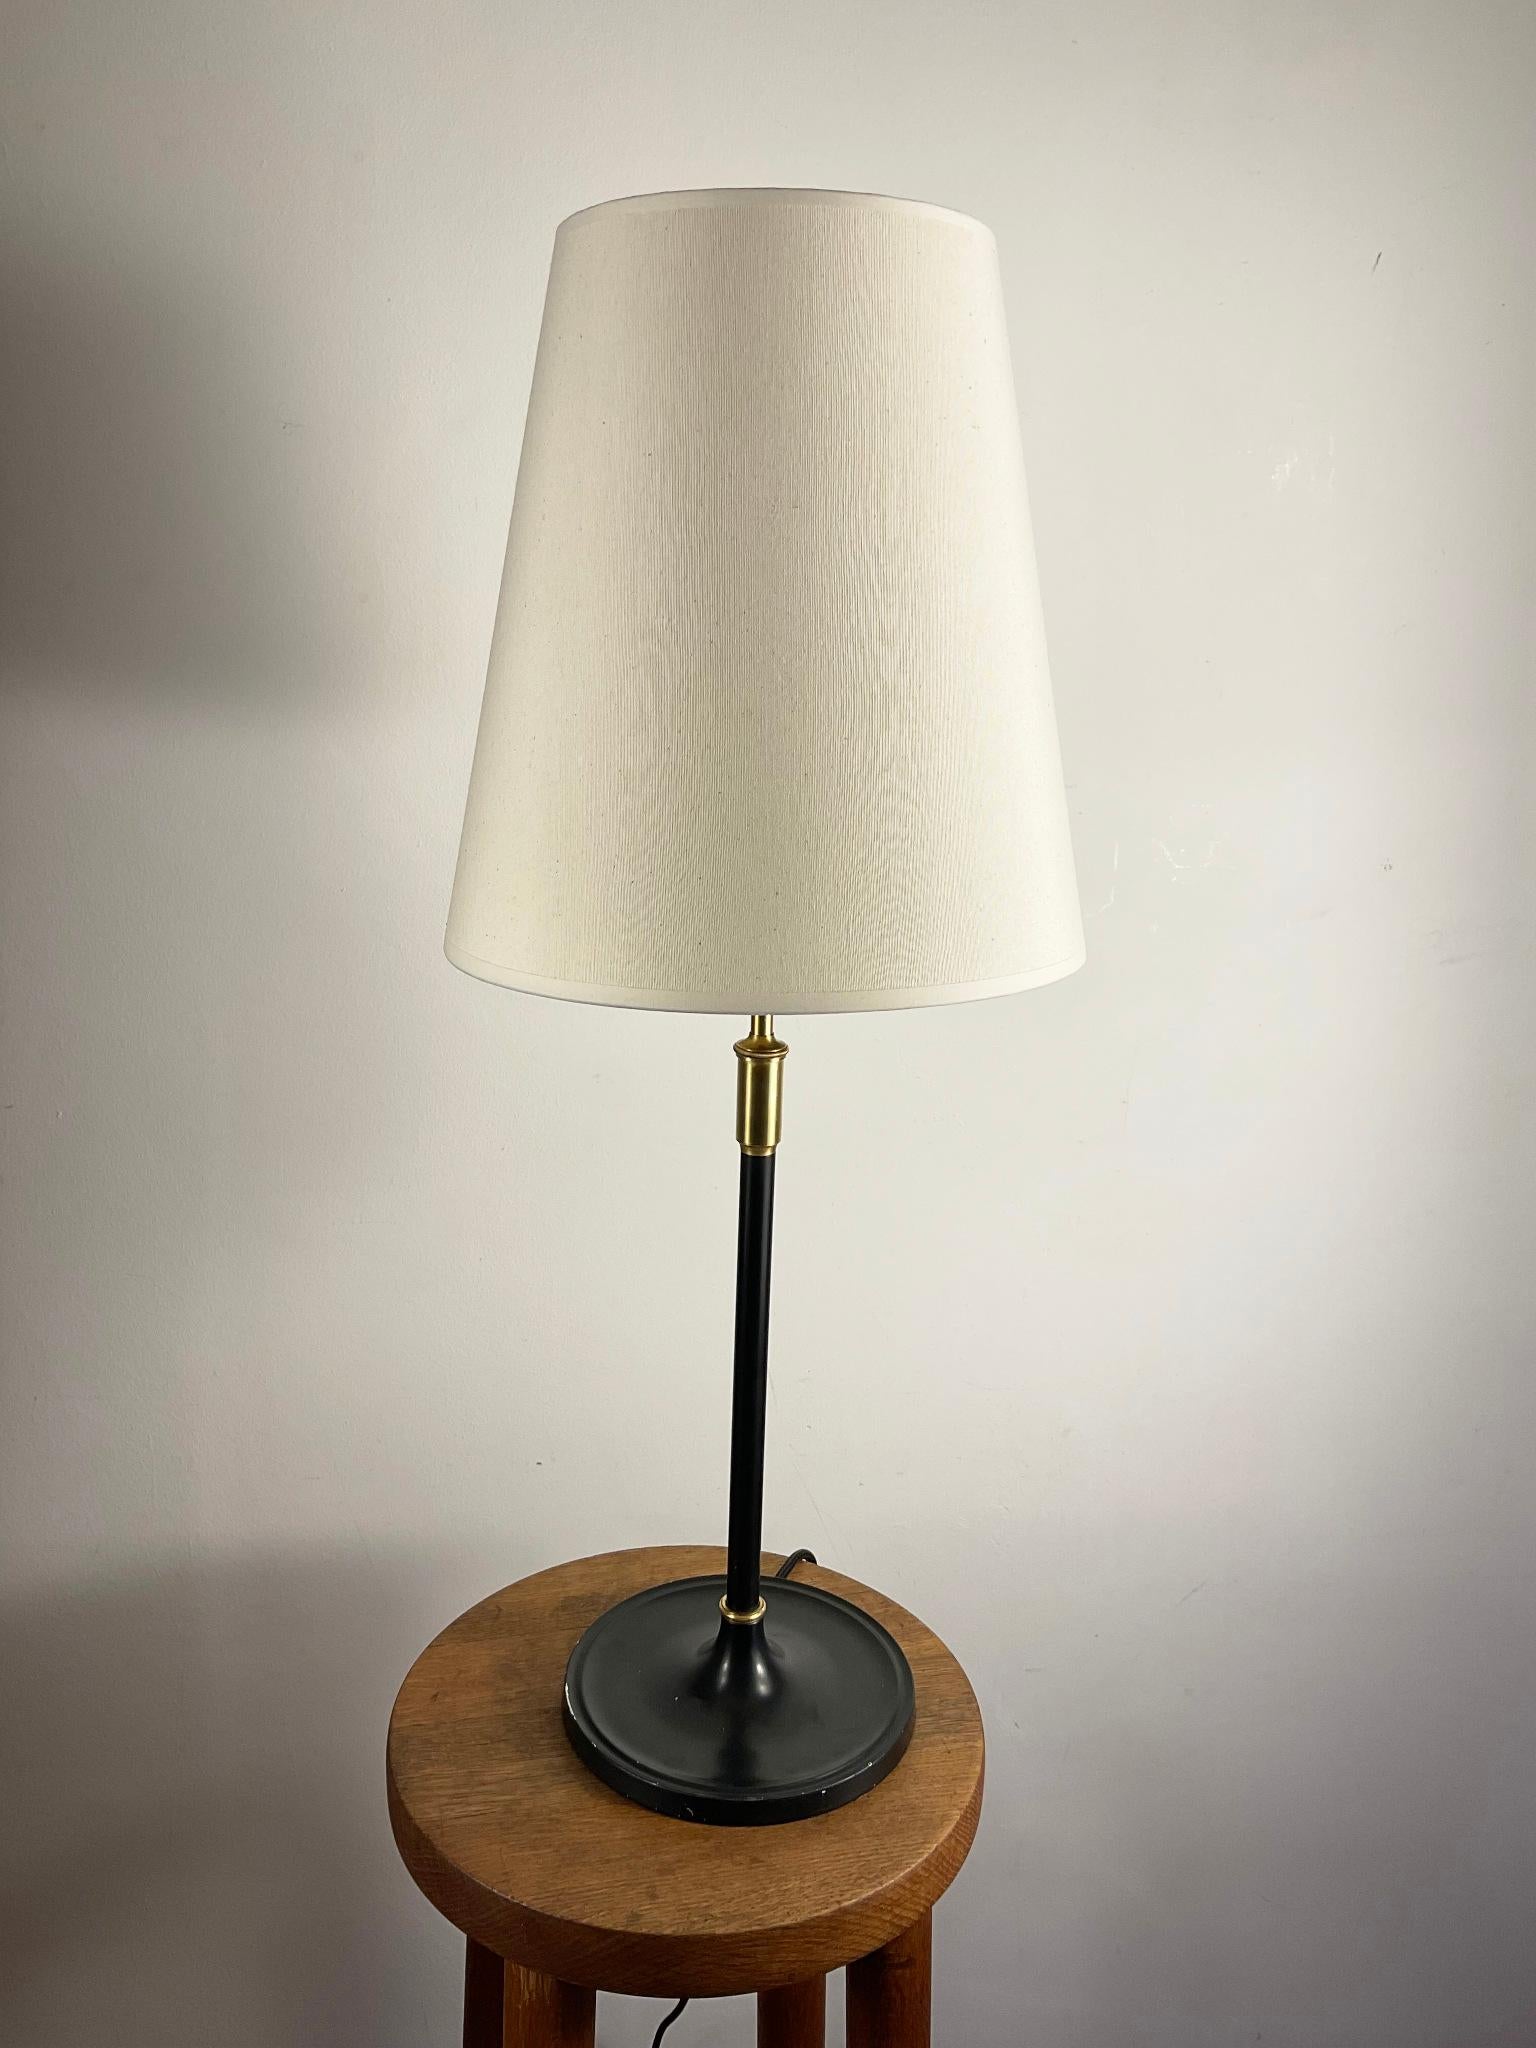 Scandinavian Modern 1950s Danish Table Lamp Designed by Aage Petersen Manufactured by Le Klint For Sale